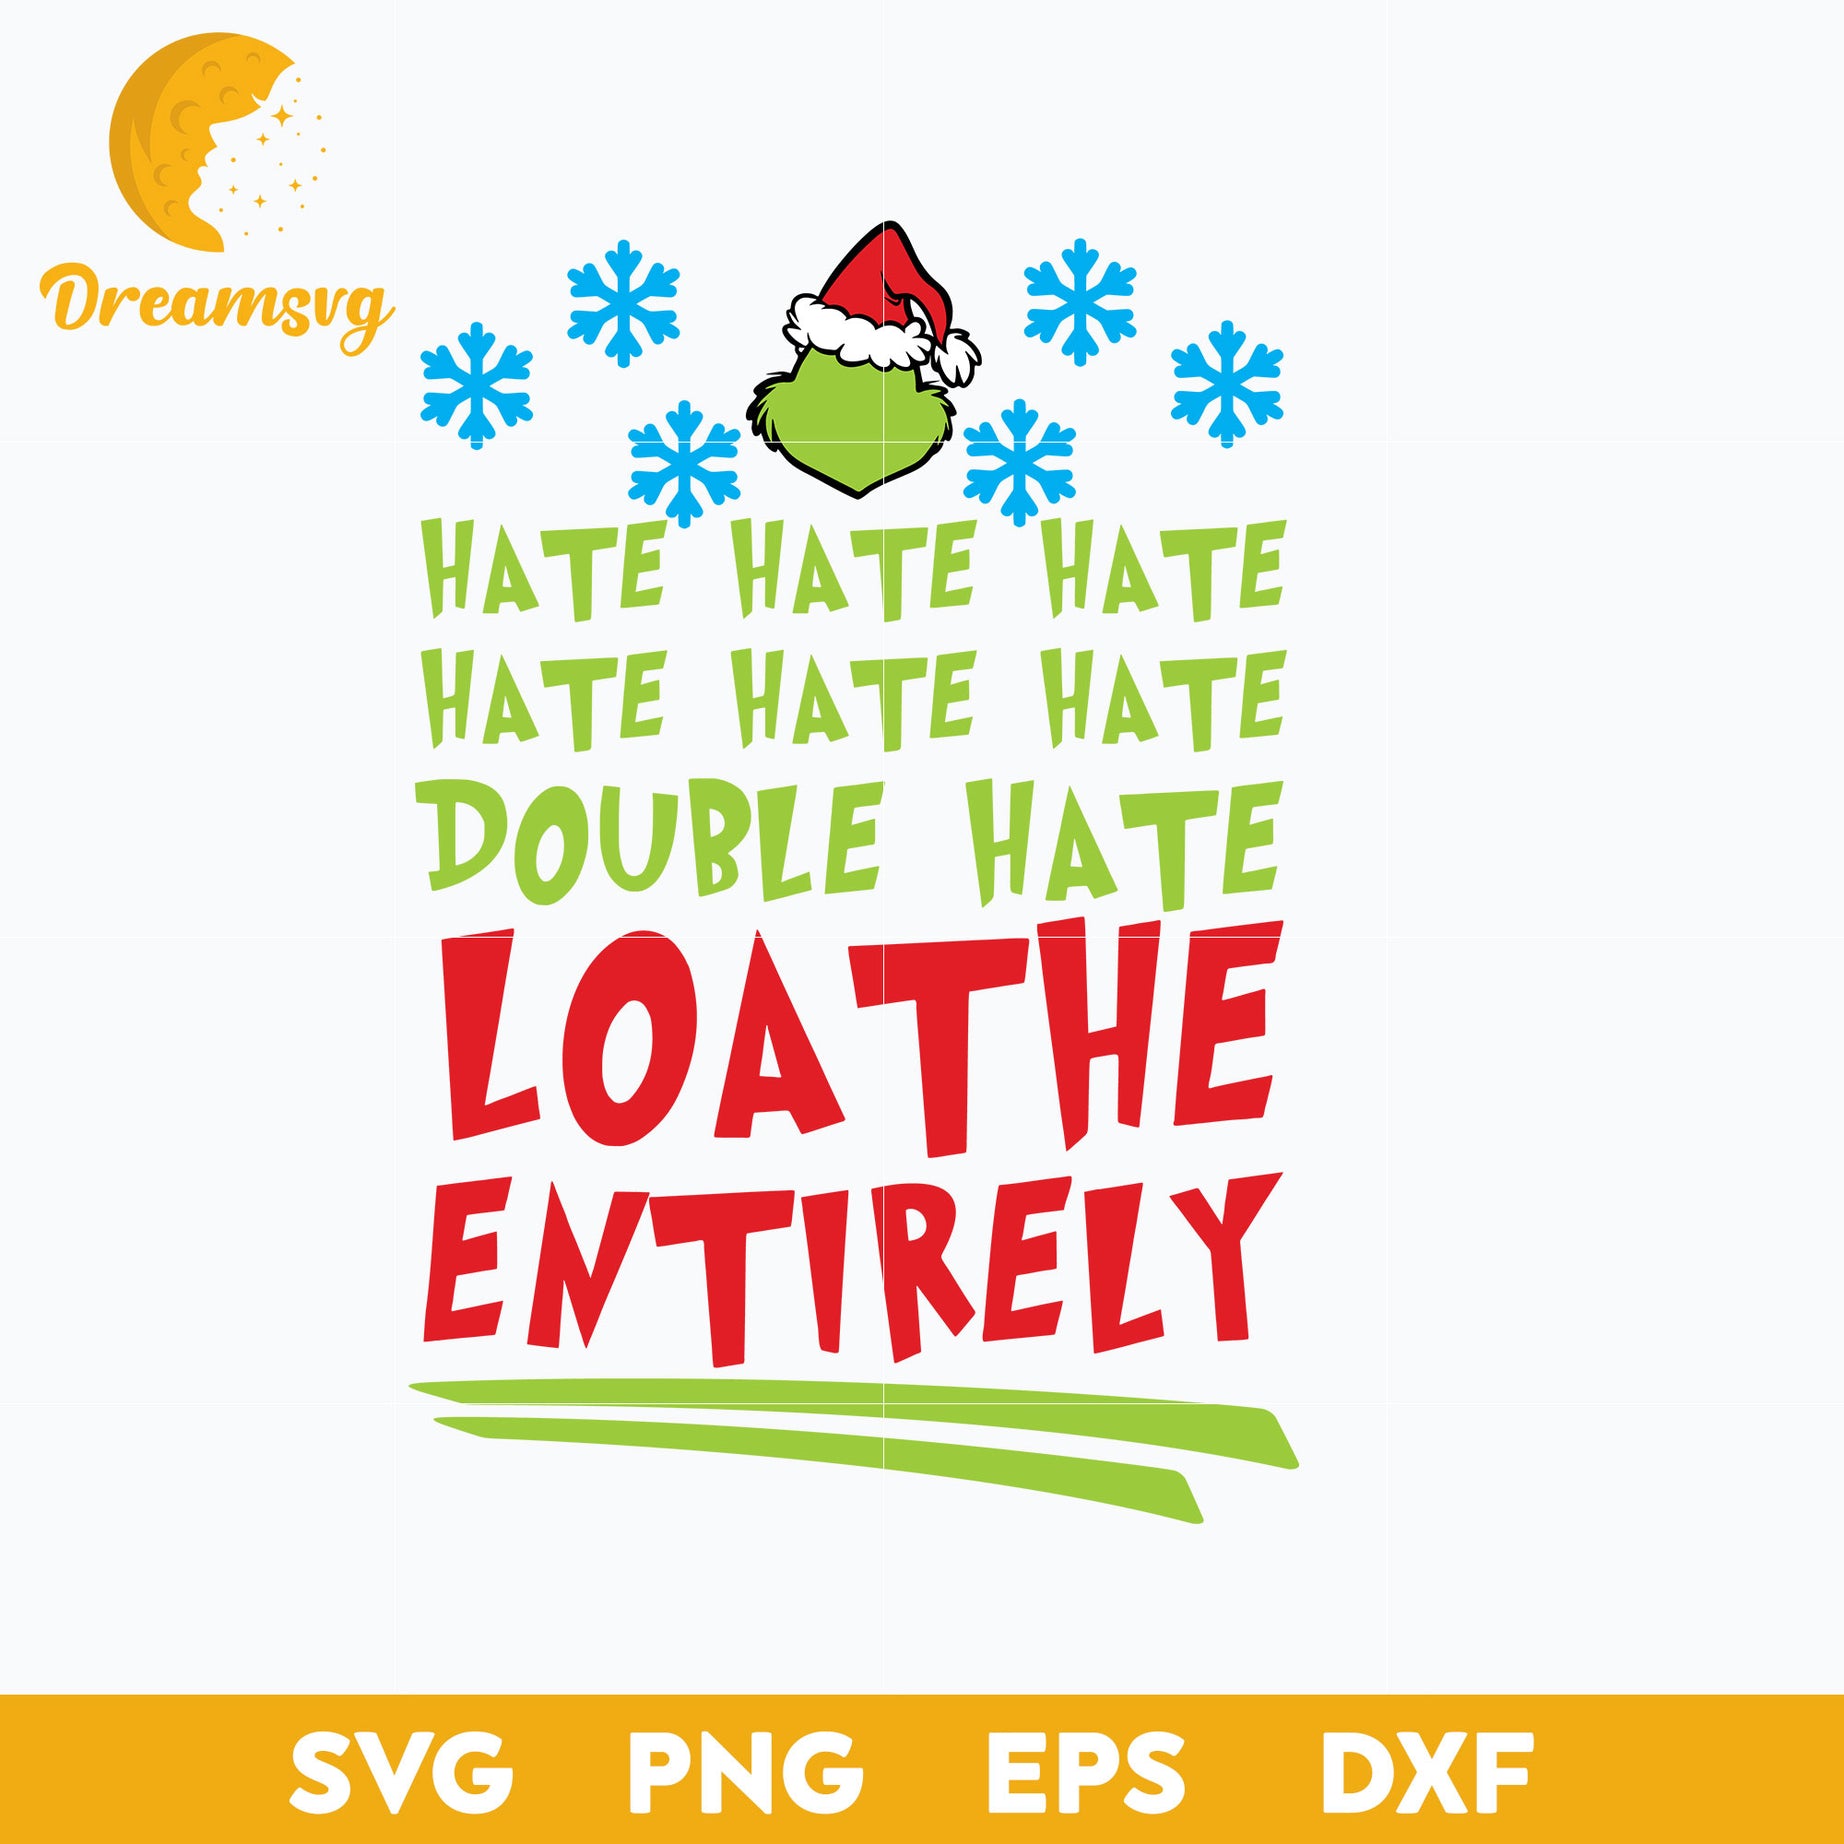 Hate Double Hate Loathe Entirely  SVG, Christmas SVG, PNG DXF EPS Digital File.